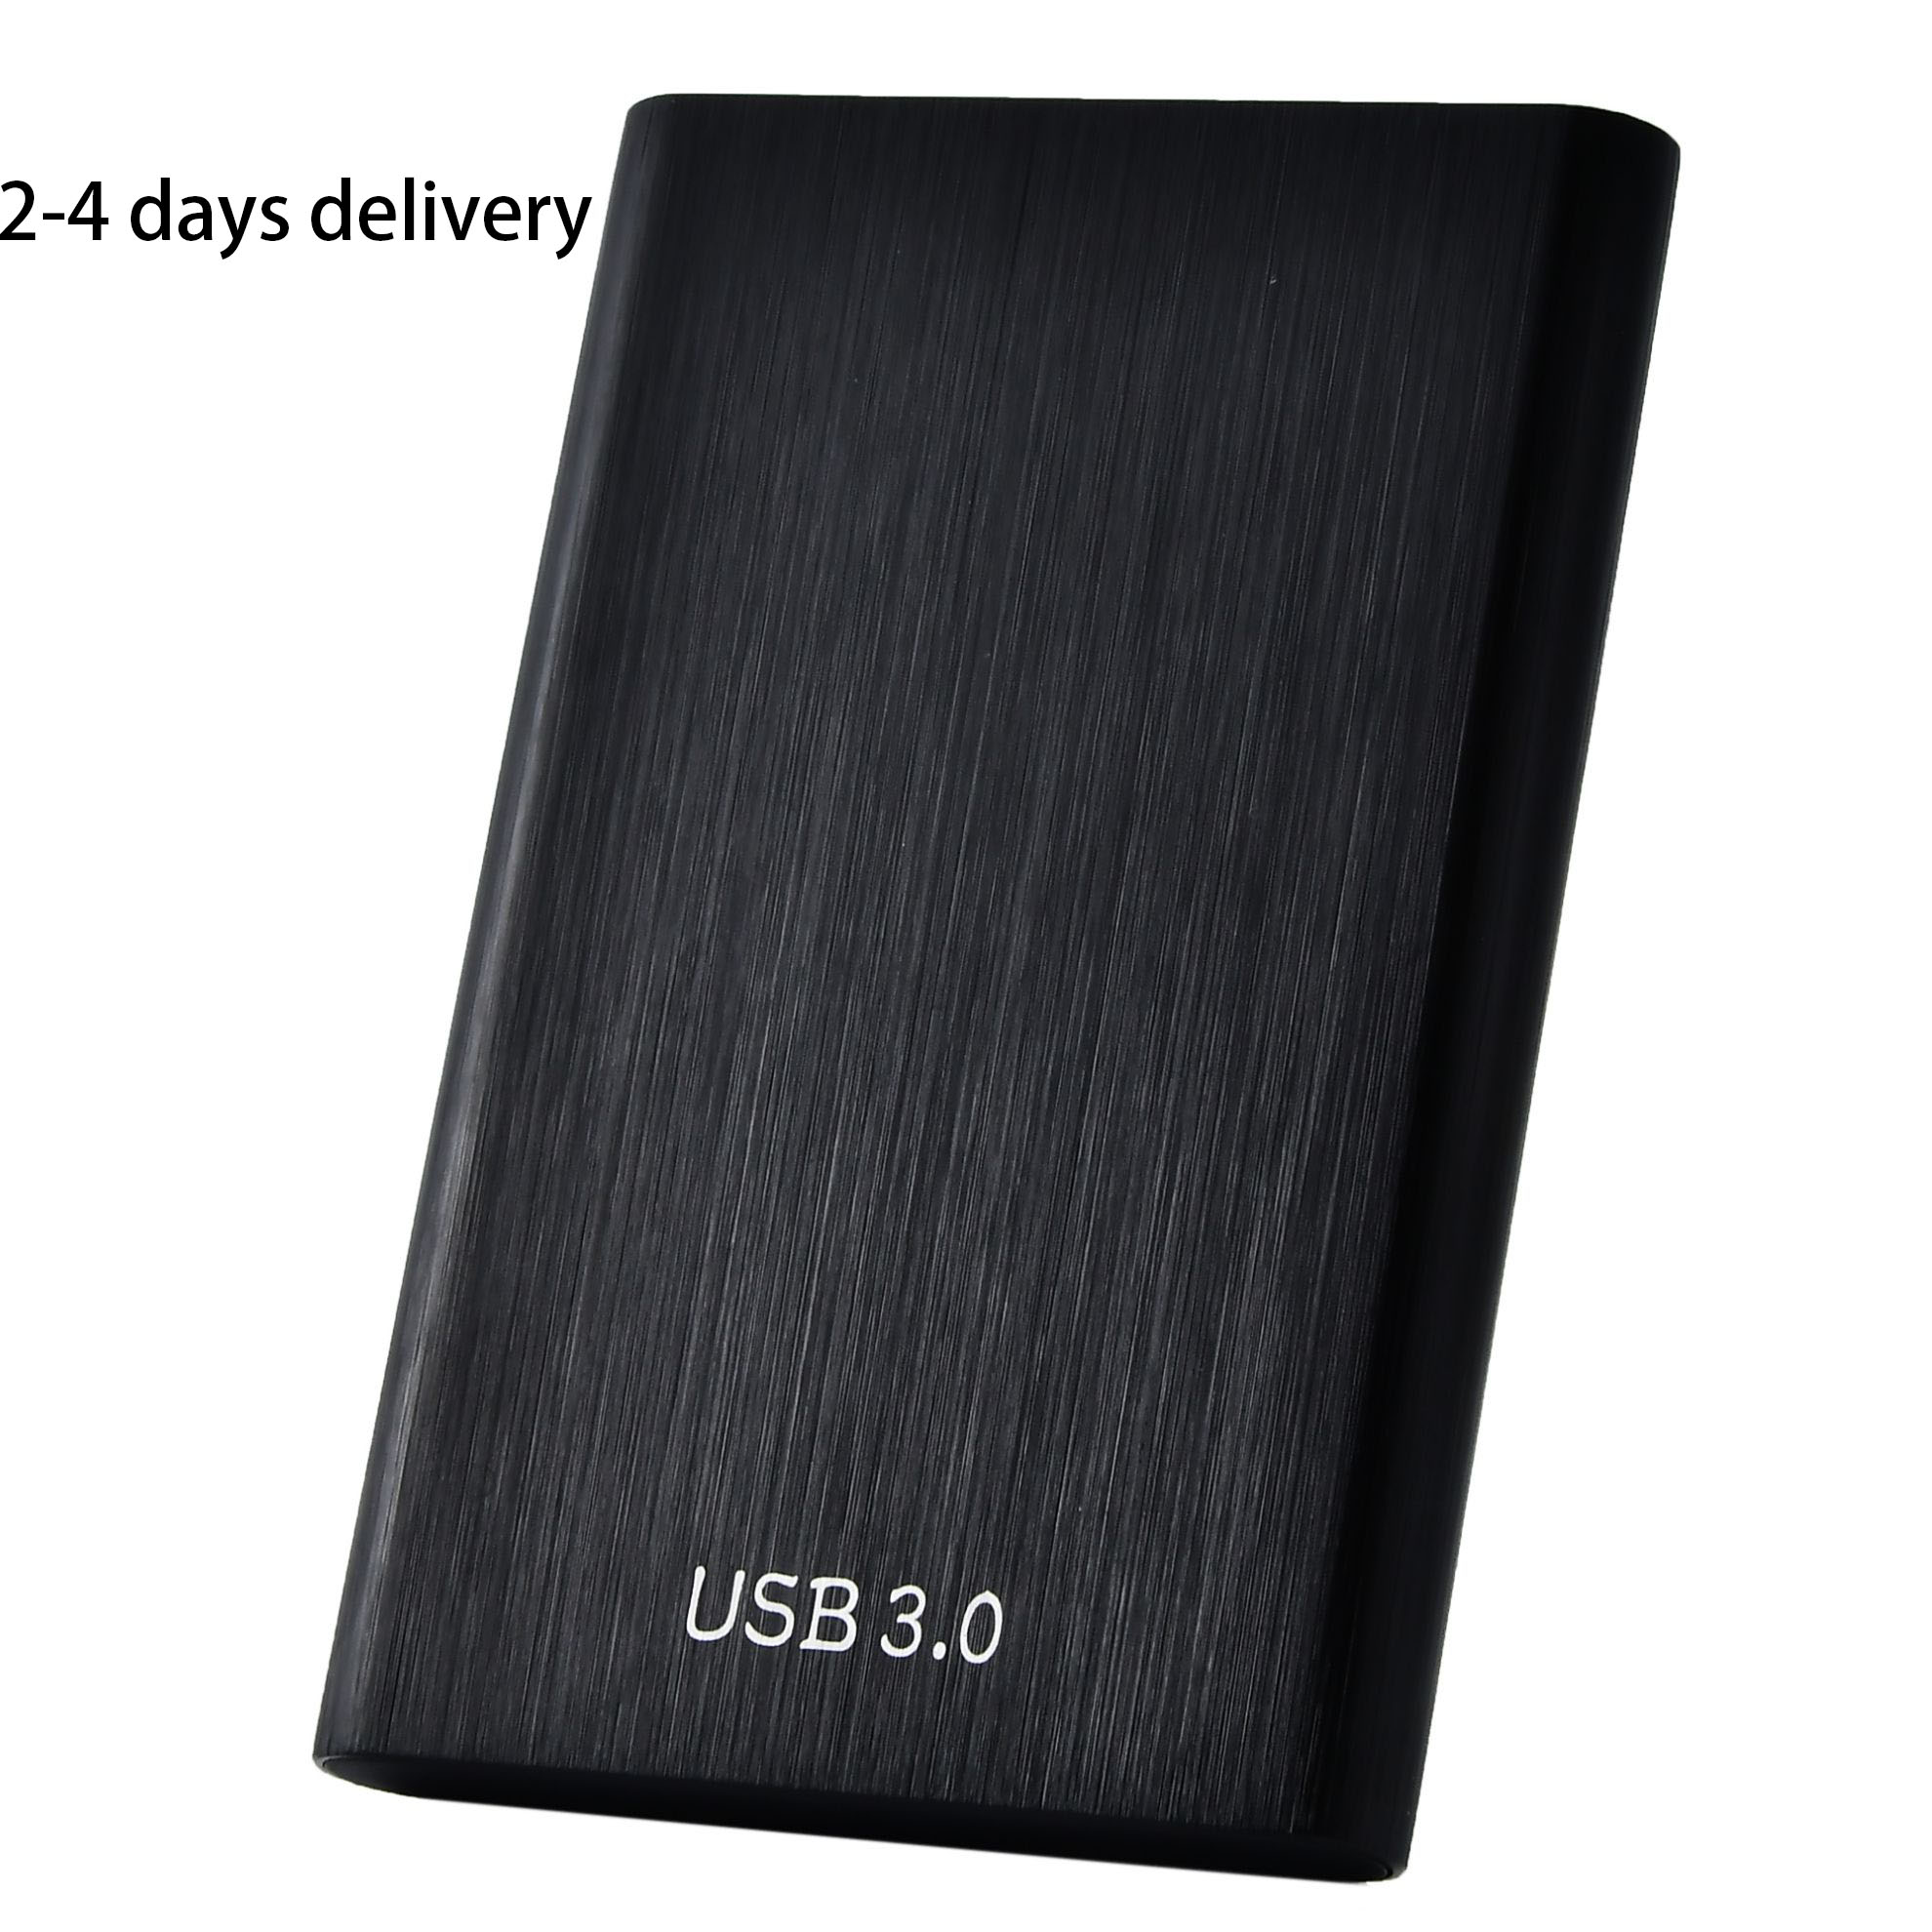 

External Hard Drive Portable External Solid State Drive 2TB,High Speed USB 3.1 Compatible with PC, Laptop and Mac